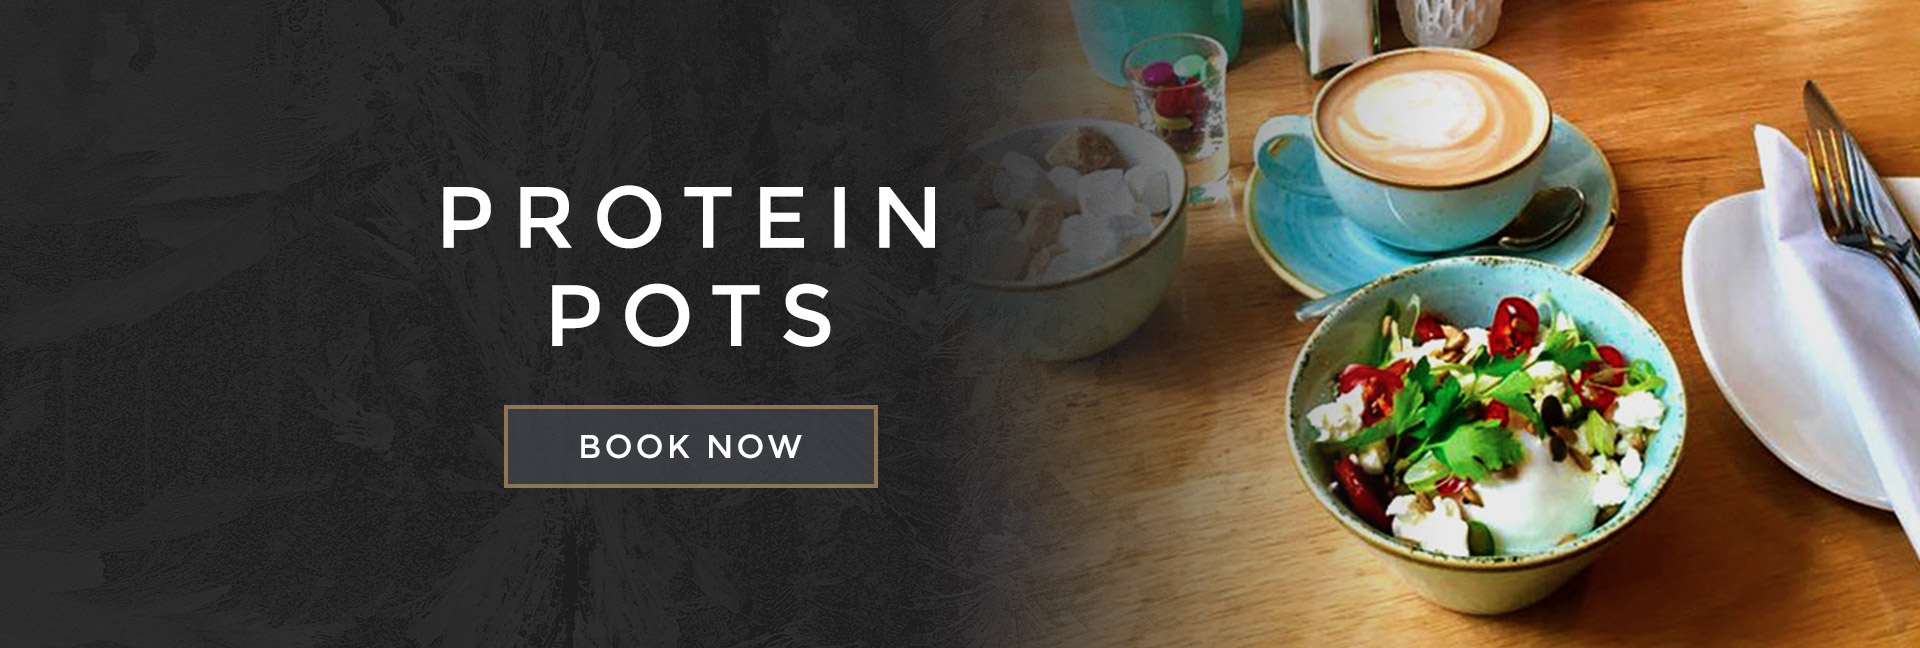 Protein pots at All Bar One Leicester Square - Book your table